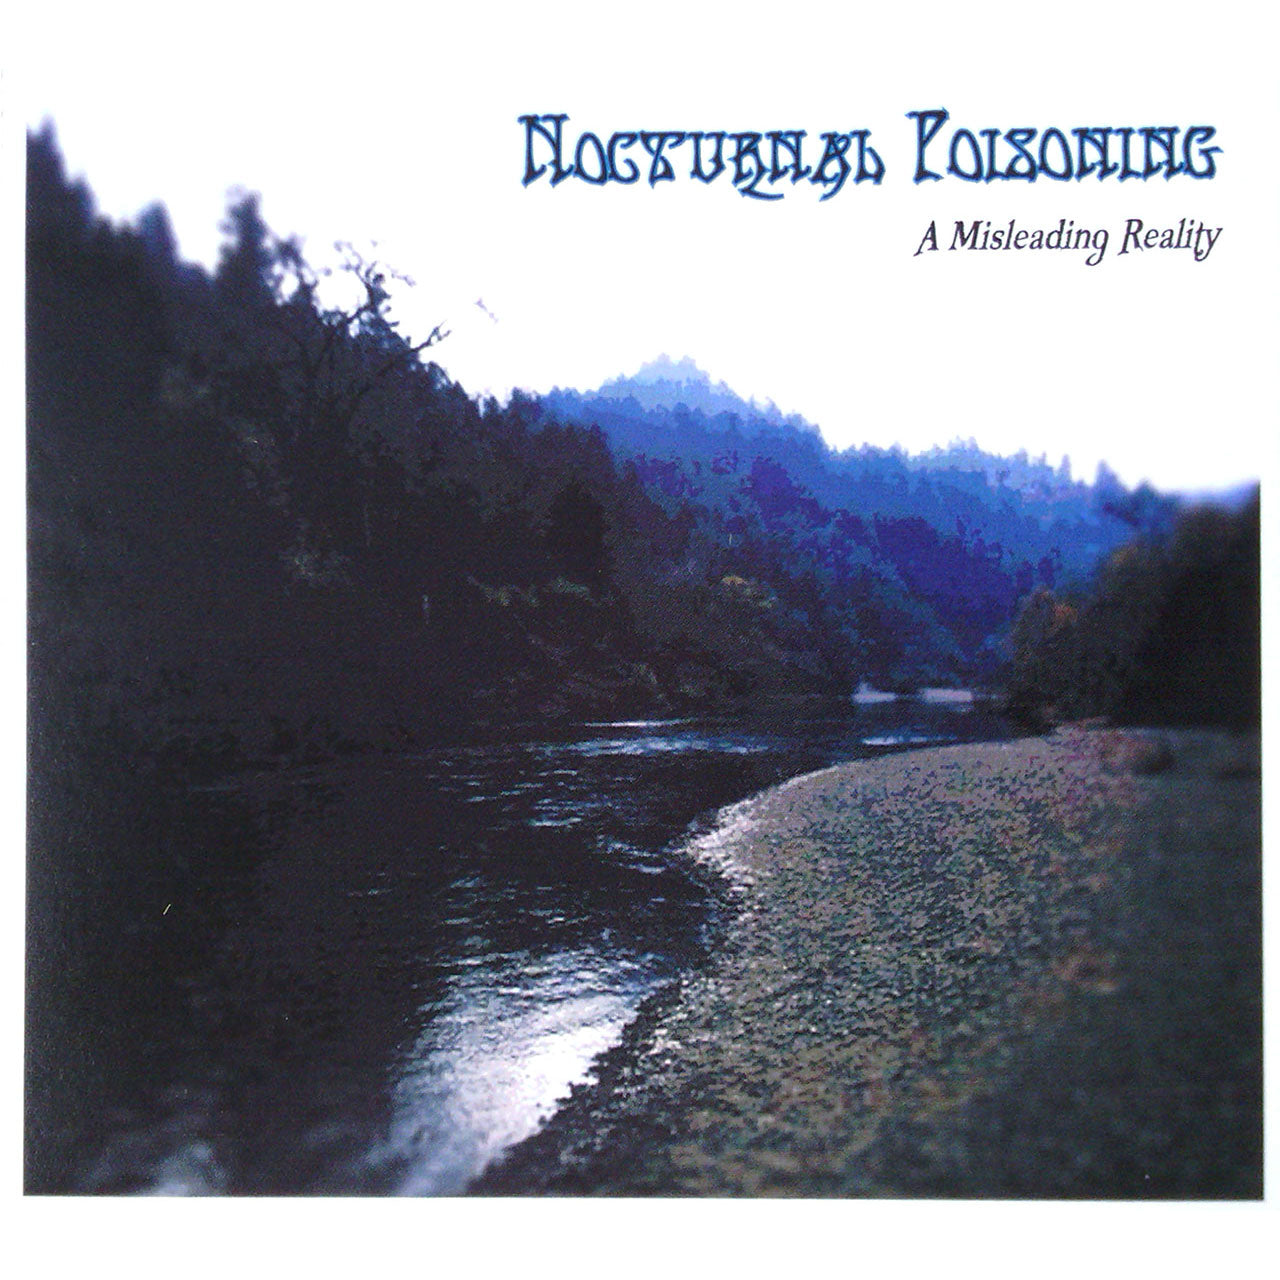 Nocturnal Poisoning - A Misleading Reality (Signed) (Digipak CD)